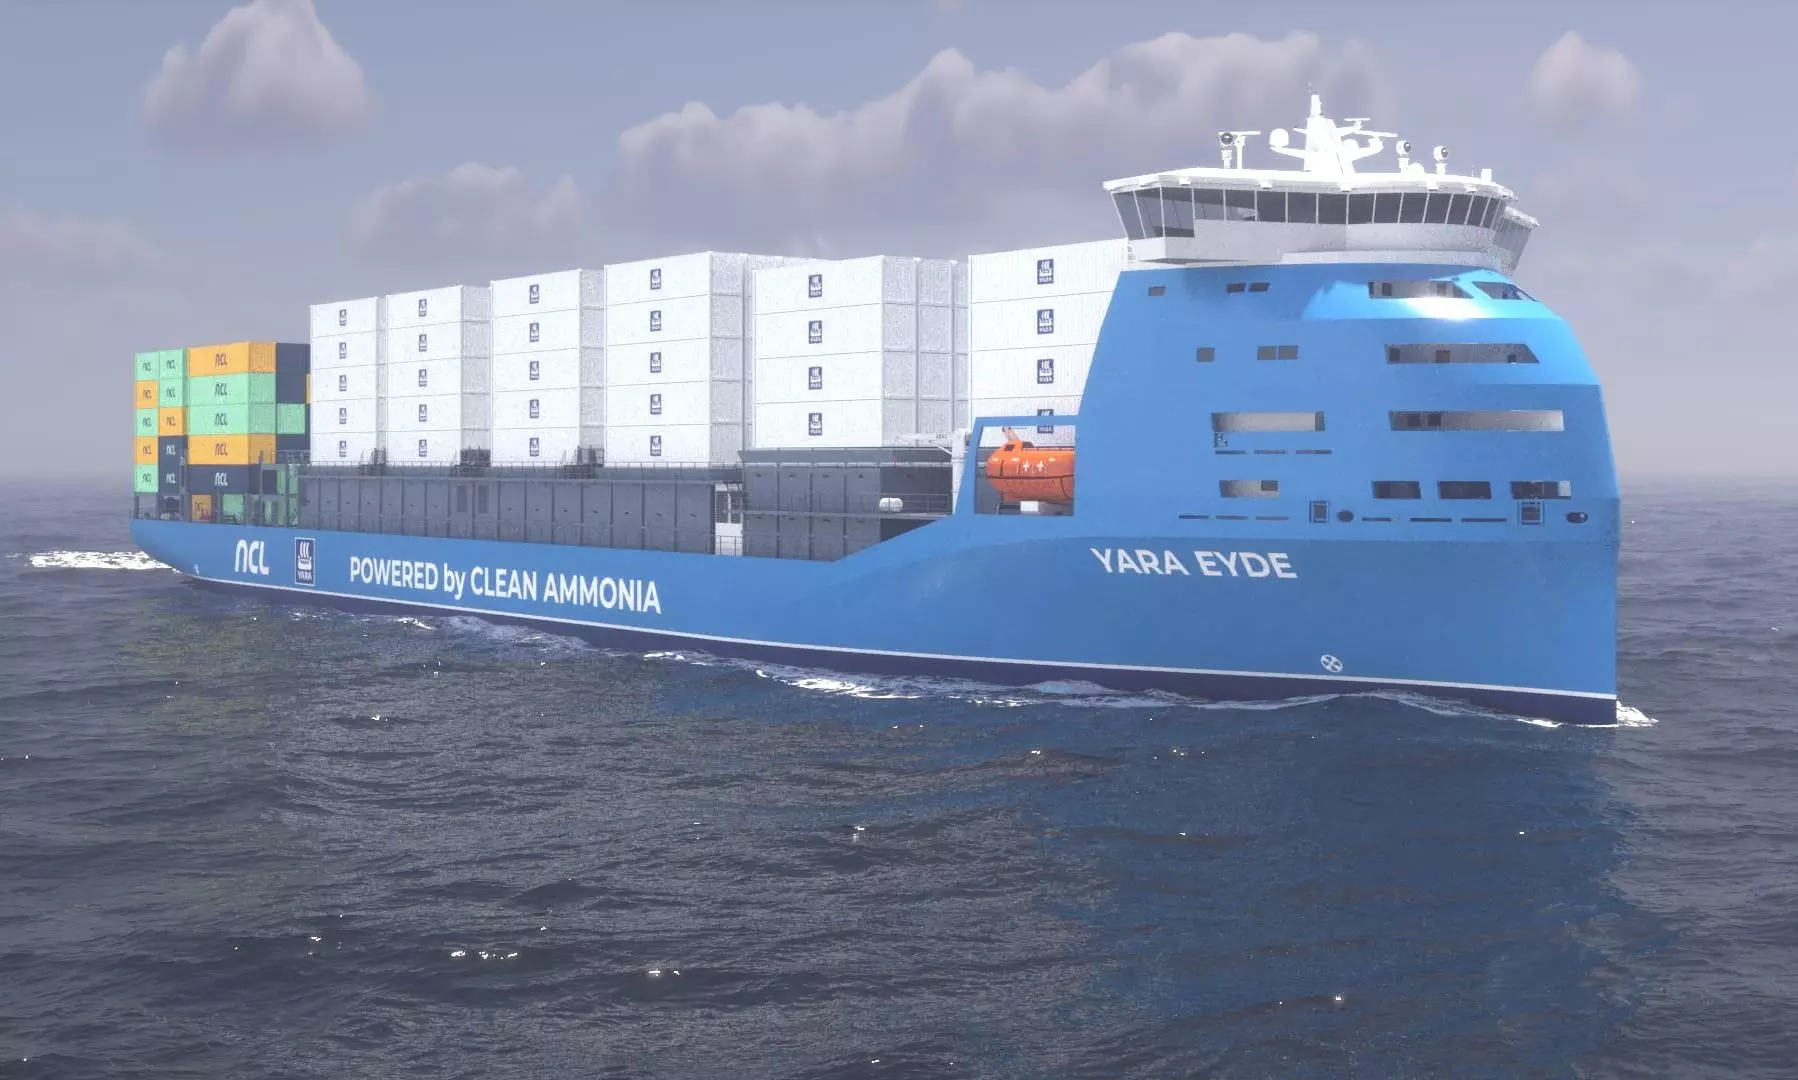 Yara Eyde - worlds first ammonia-powered container ship